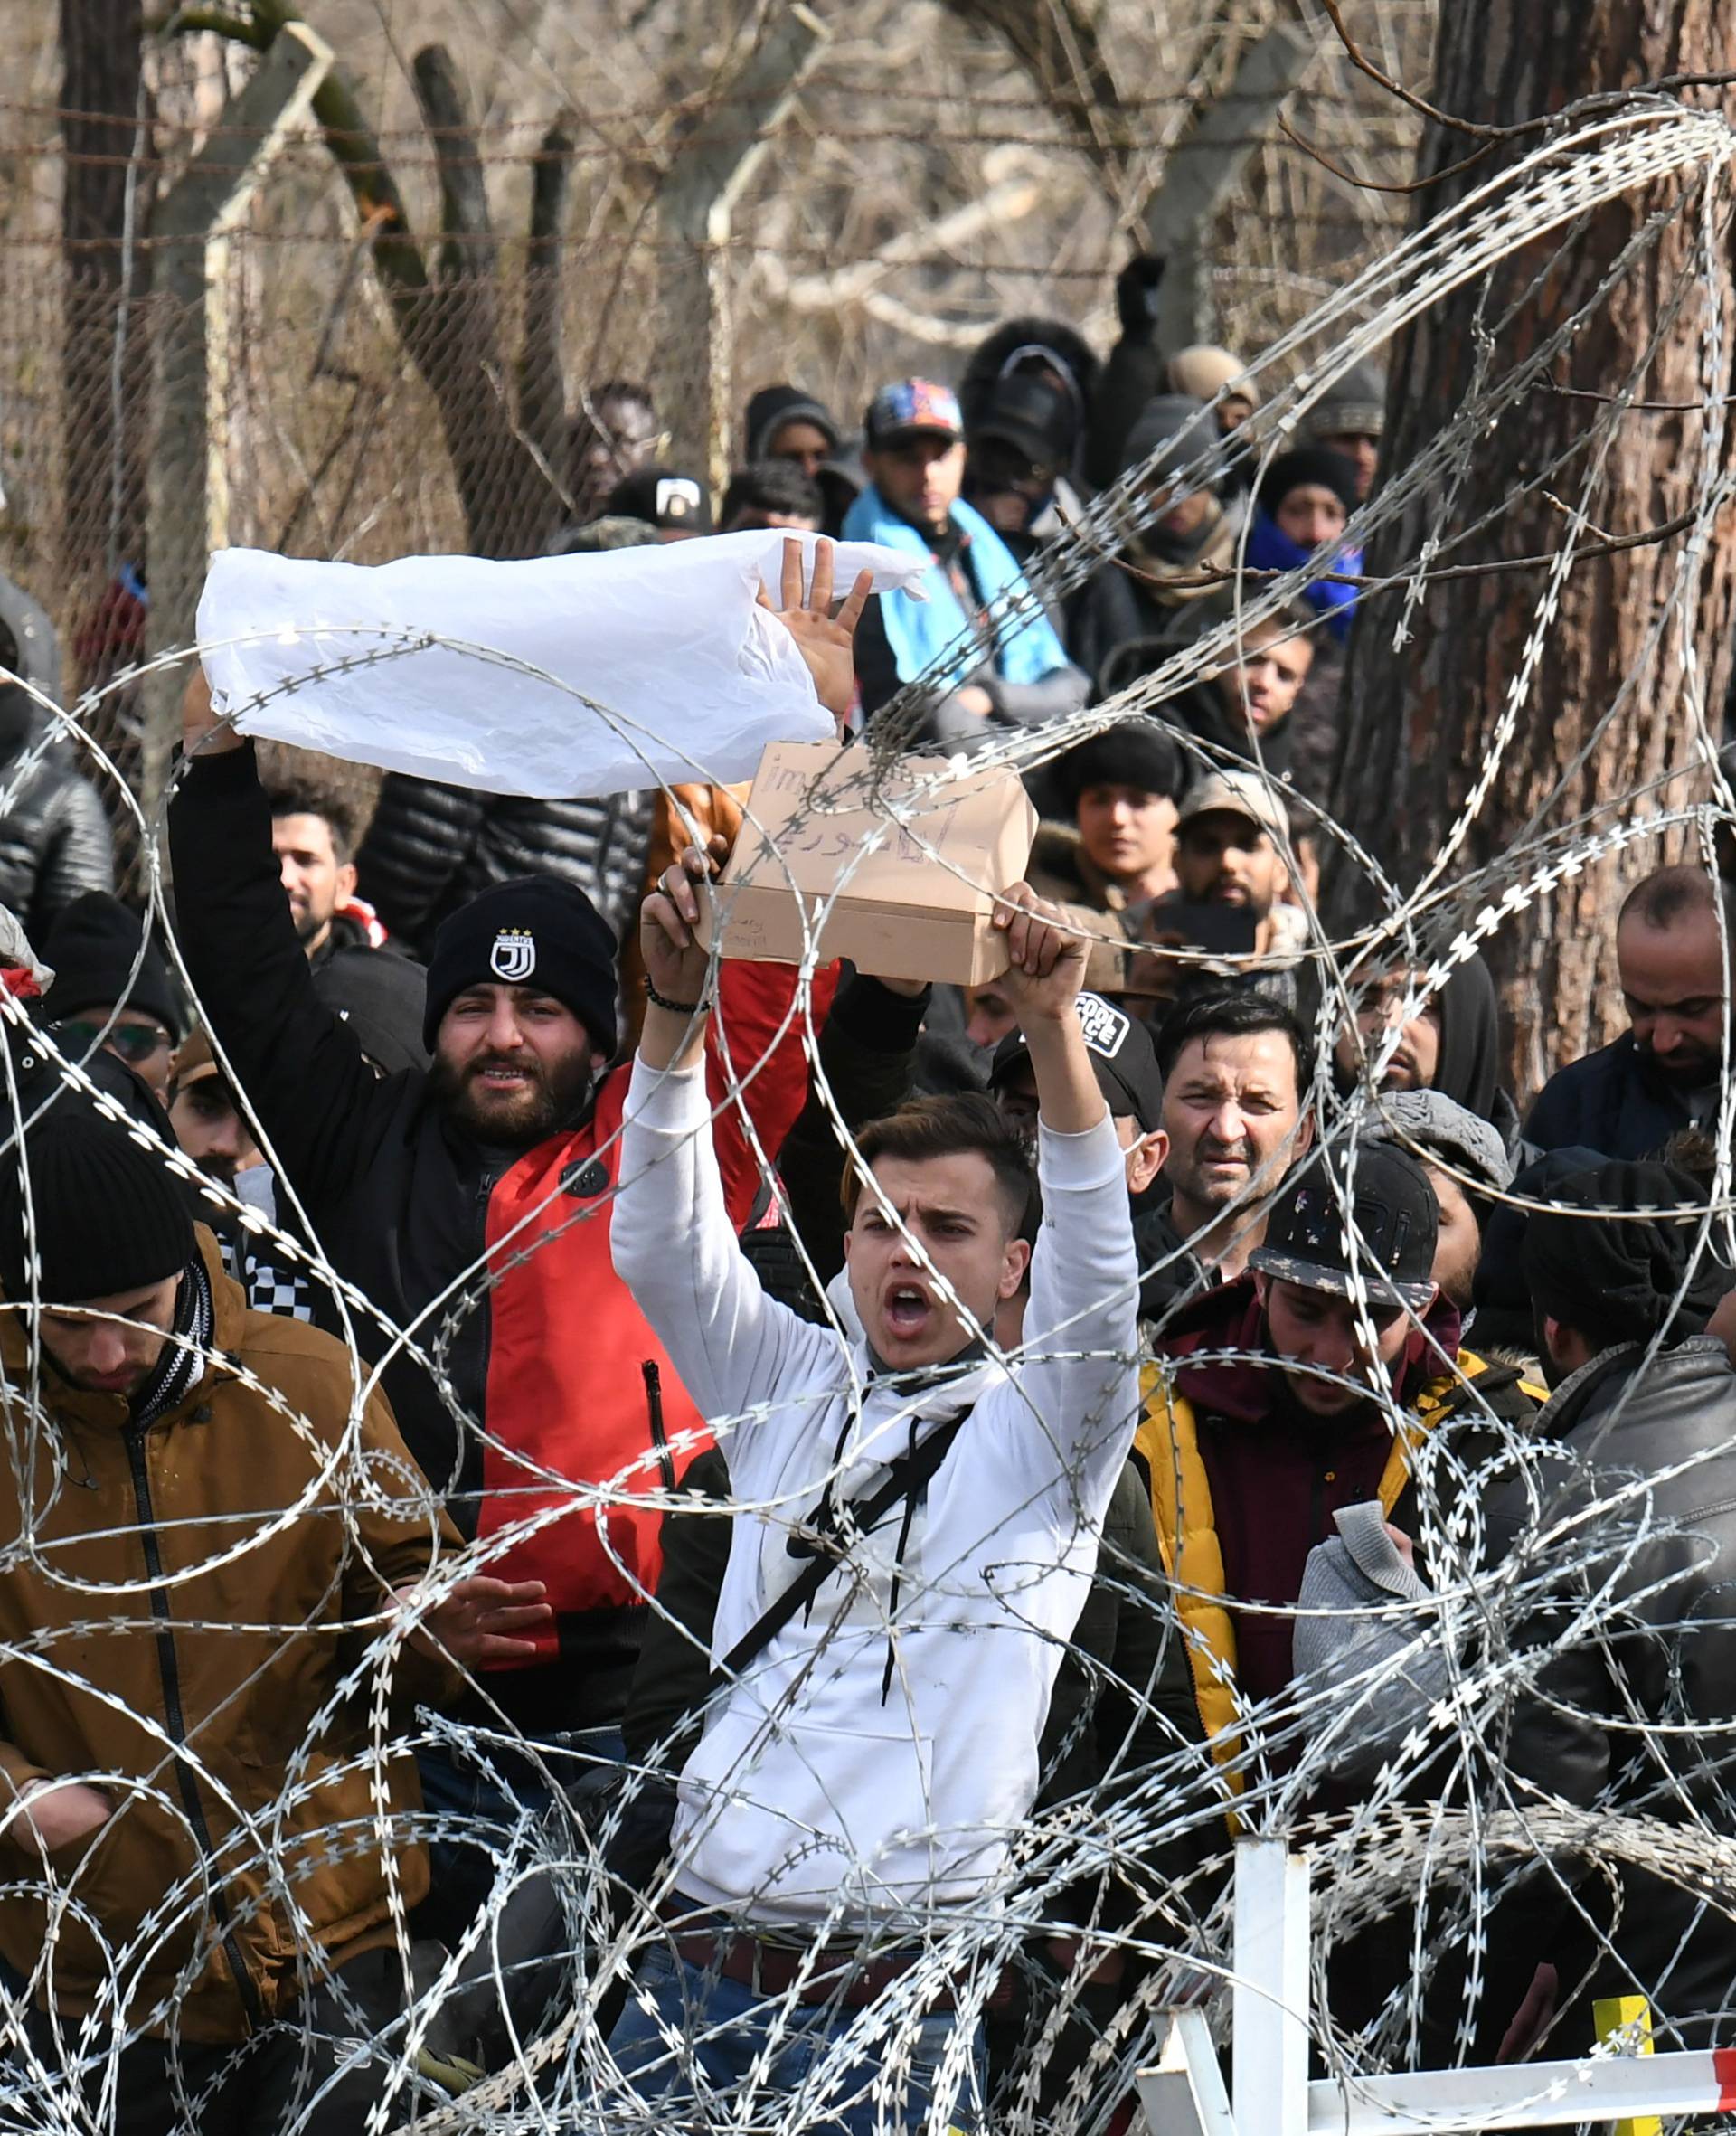 Migrants who want to cross into Greece from Turkey's Pazarkule border crossing shout slogans as they are gathered at the borderline, in Kastanies